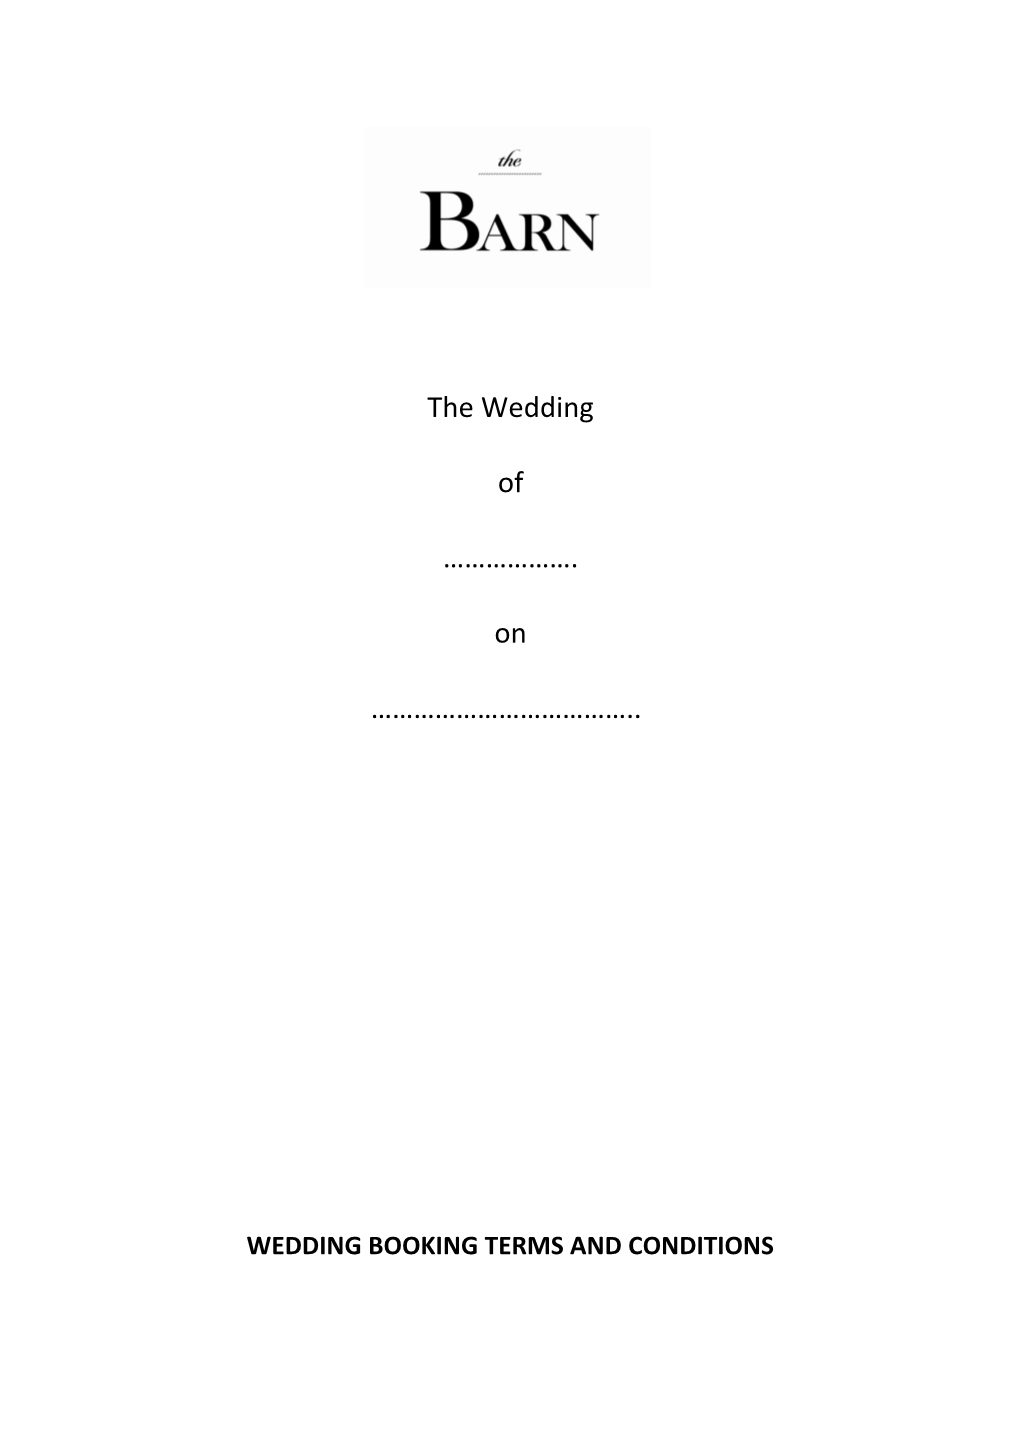 The Barn Wedding Booking Terms and Conditions